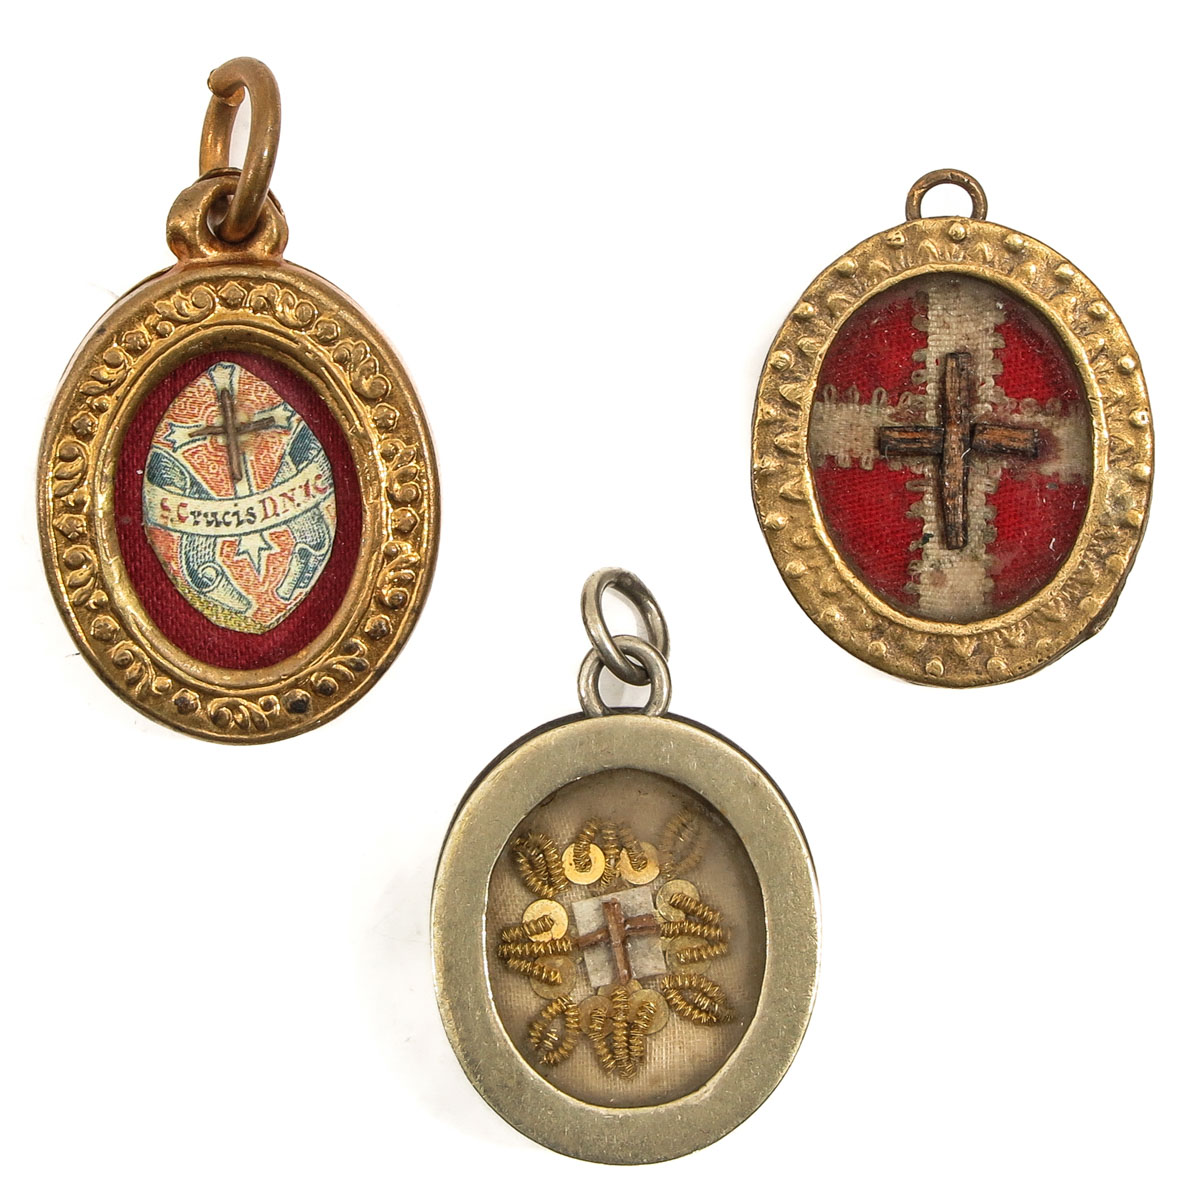 A Collection of 3 Reliquaries